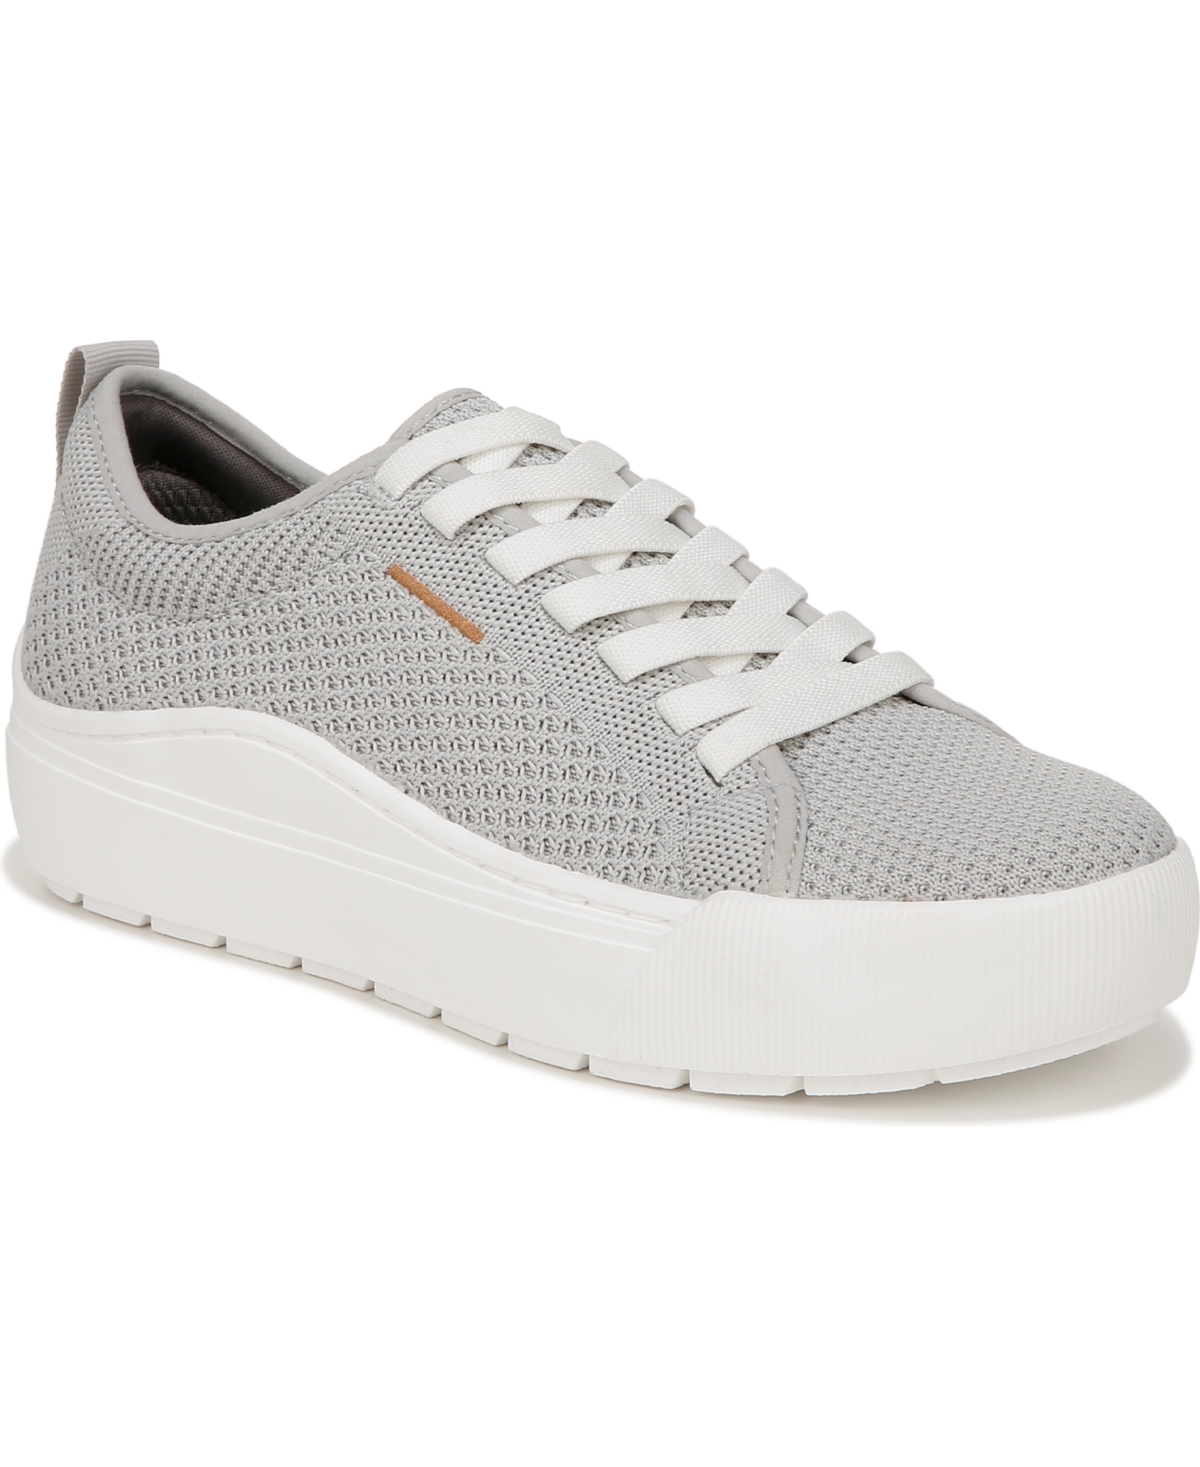 Dr. Scholl's Women's Time Off Knit Platform Sneakers In Vapor Grey Knit Fabric